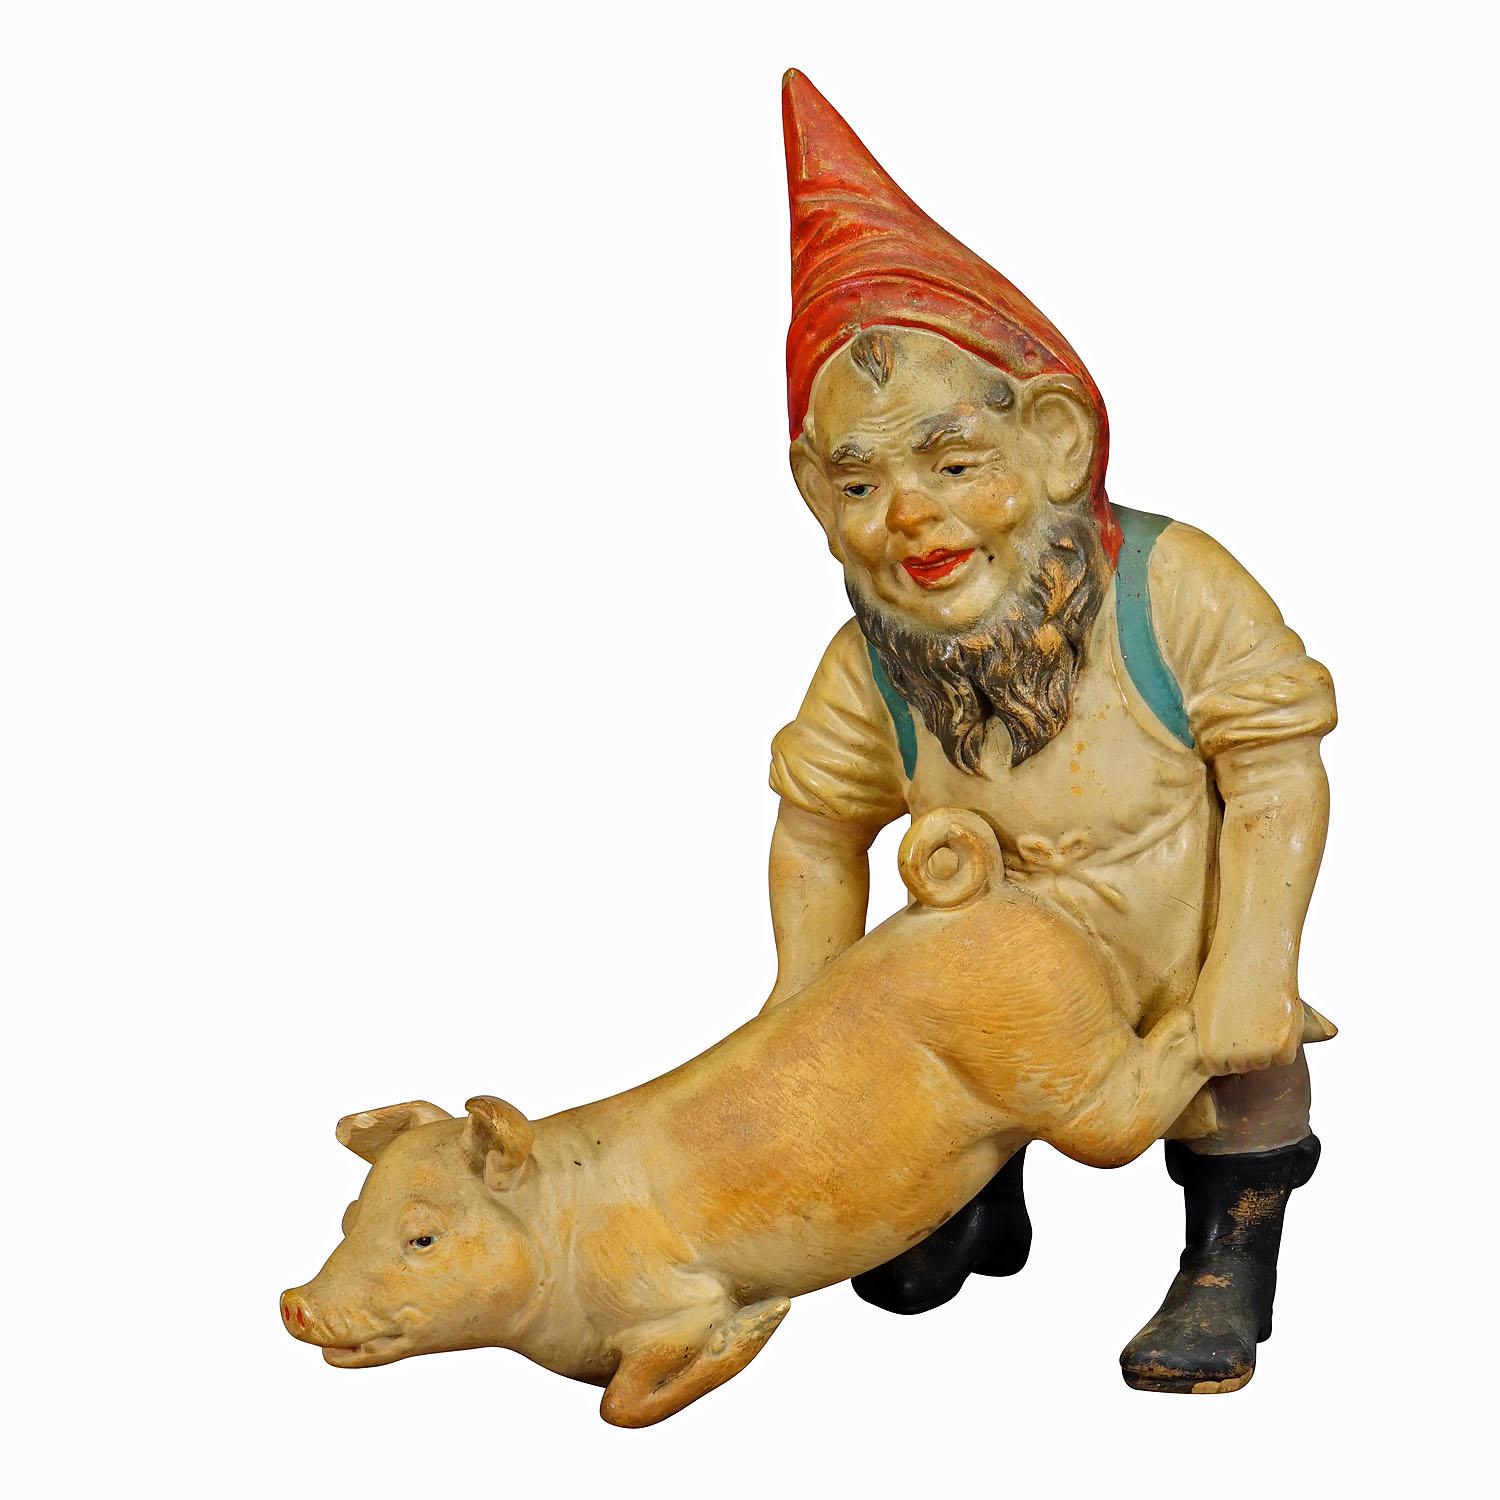 Rare Terracotta Garden Gnome with Pig, Germany ca. 1920s

A large garden gnome manufactured by Heissner, Germany, ca. 1920s. The dwarf has grabbed a pig by the hind legs and is holding it like a wheelbarrow. Very good original vintage